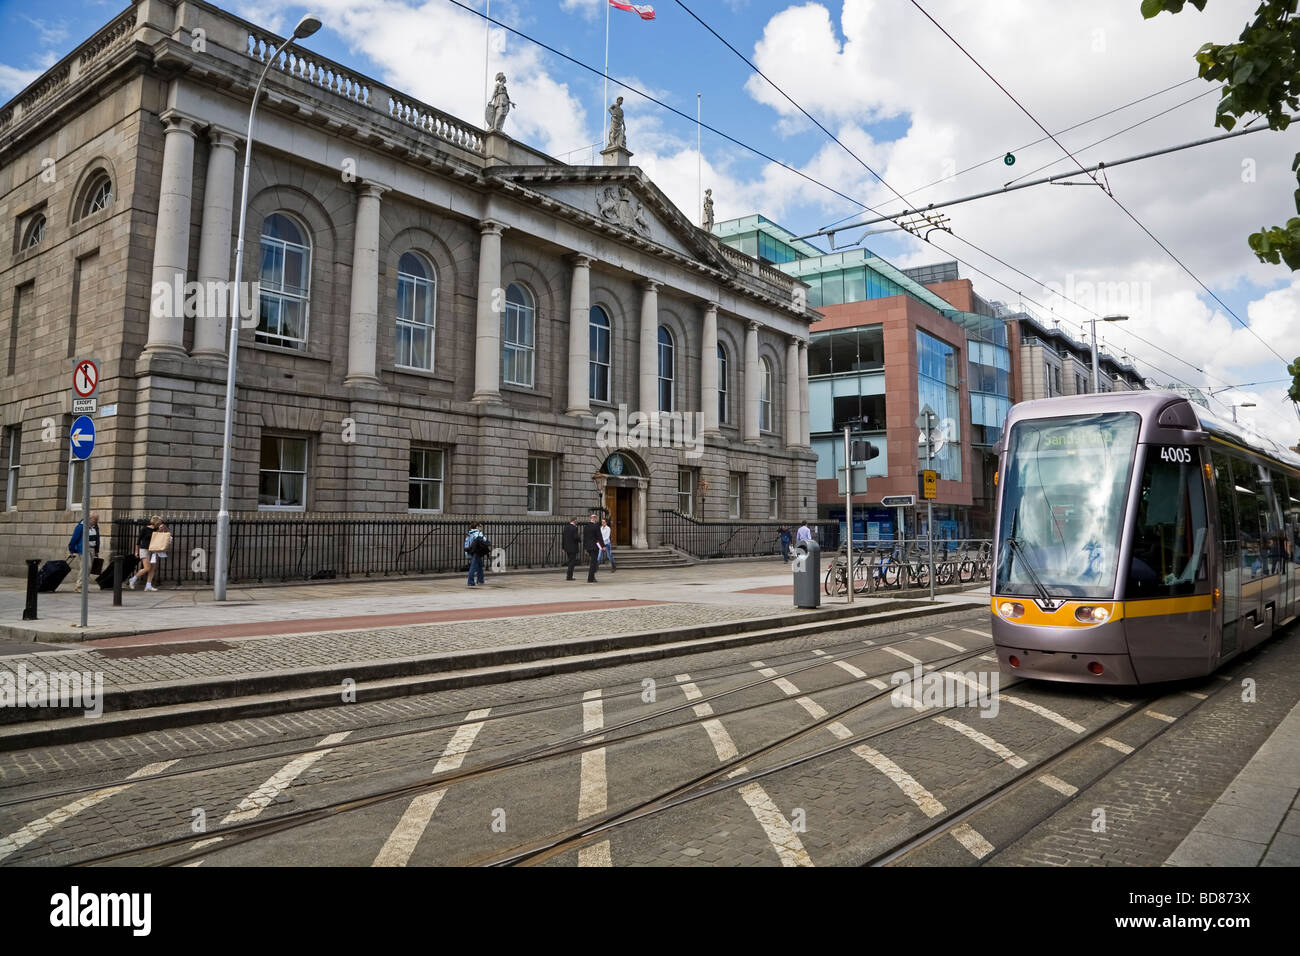 Modern LUAS Tram in front of Iveagh House, Designed by Robert Cassels, now Dept of Foreign Affairs, Built 1730, Dublin City, Ireland Stock Photo